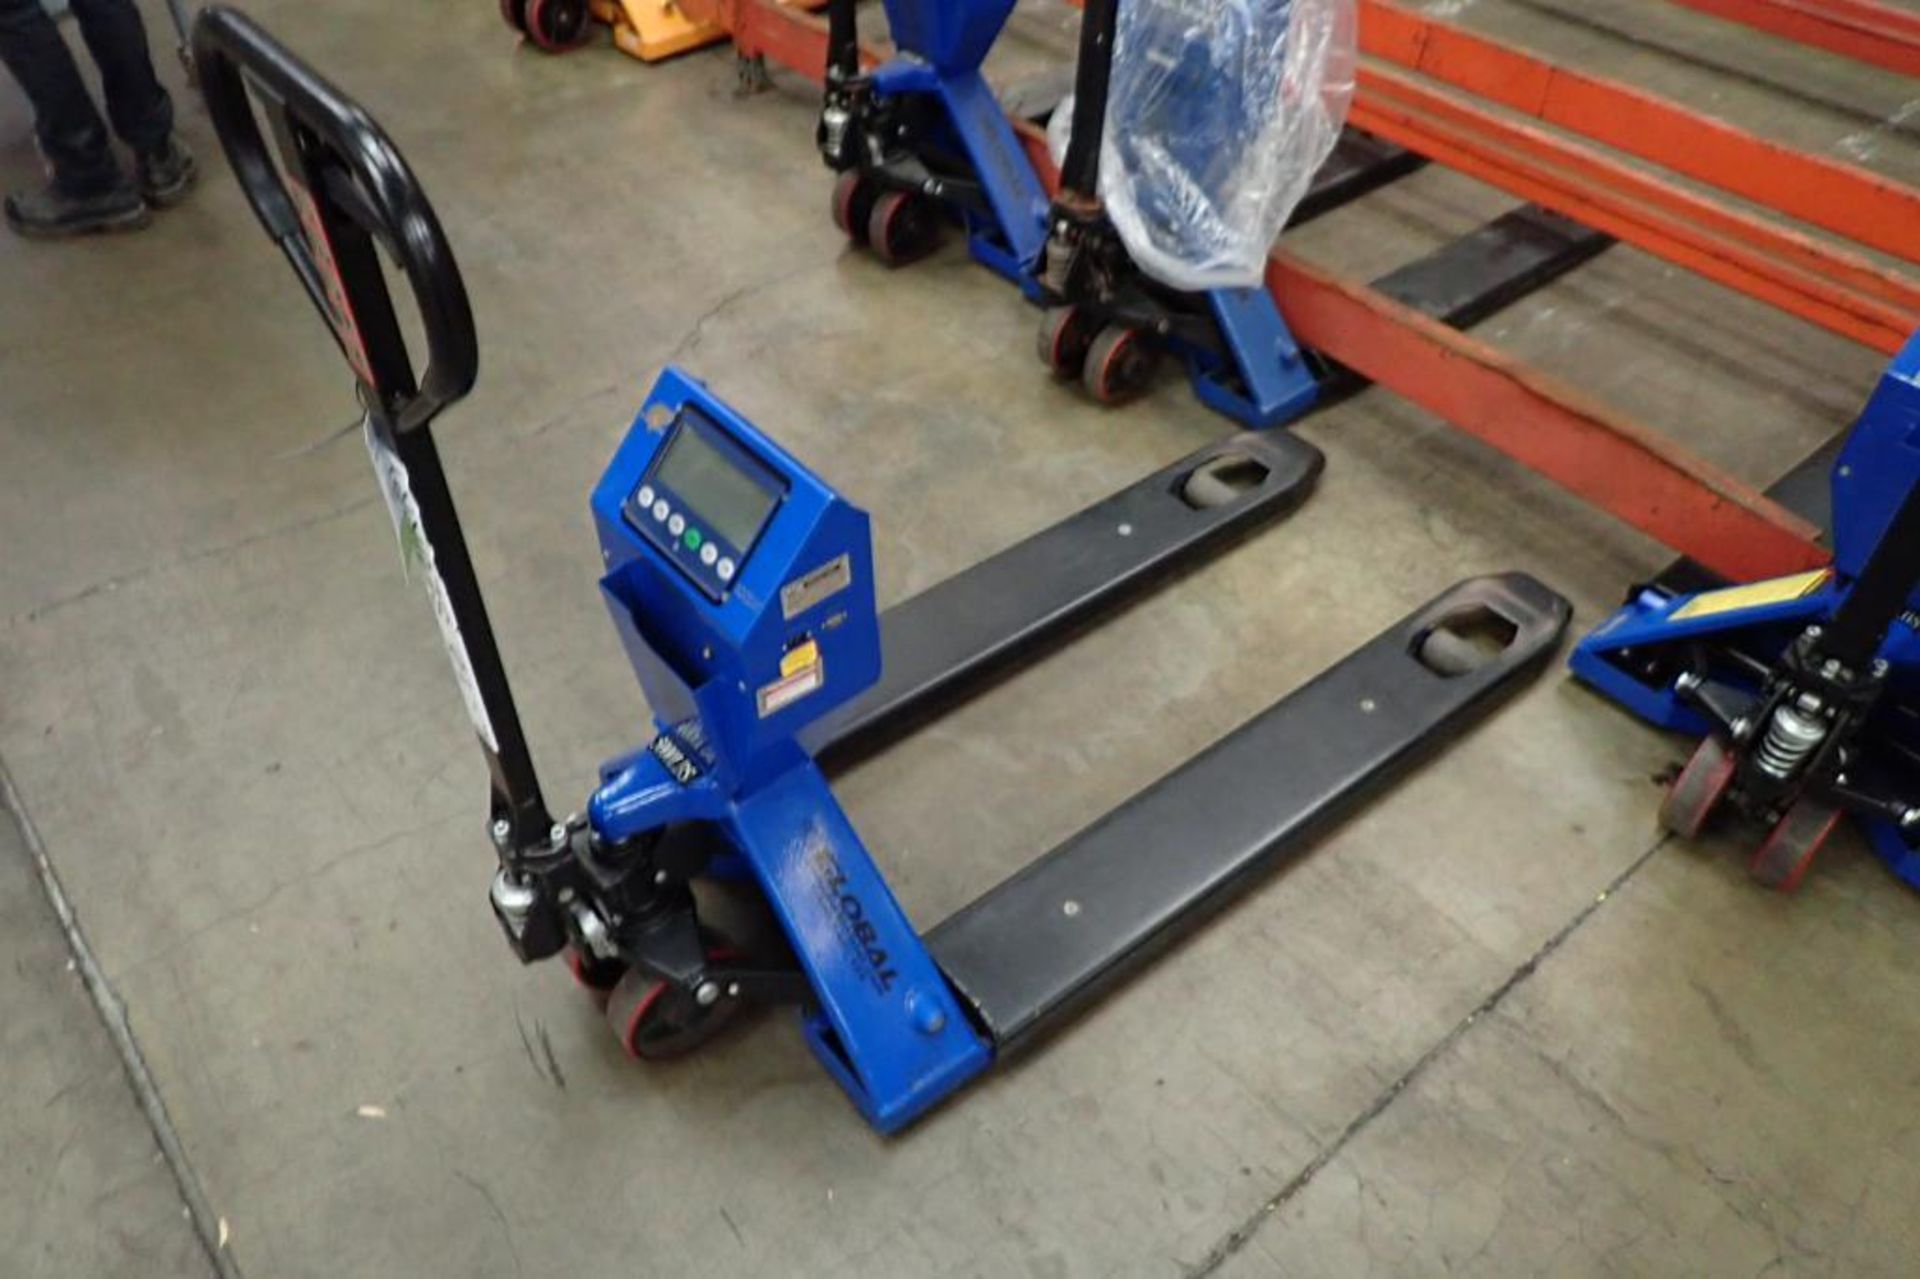 Global Industrial hand pallet jack, SN 382317, with Mettler Toledo on board scale, 5000 lb capacity, - Image 2 of 7